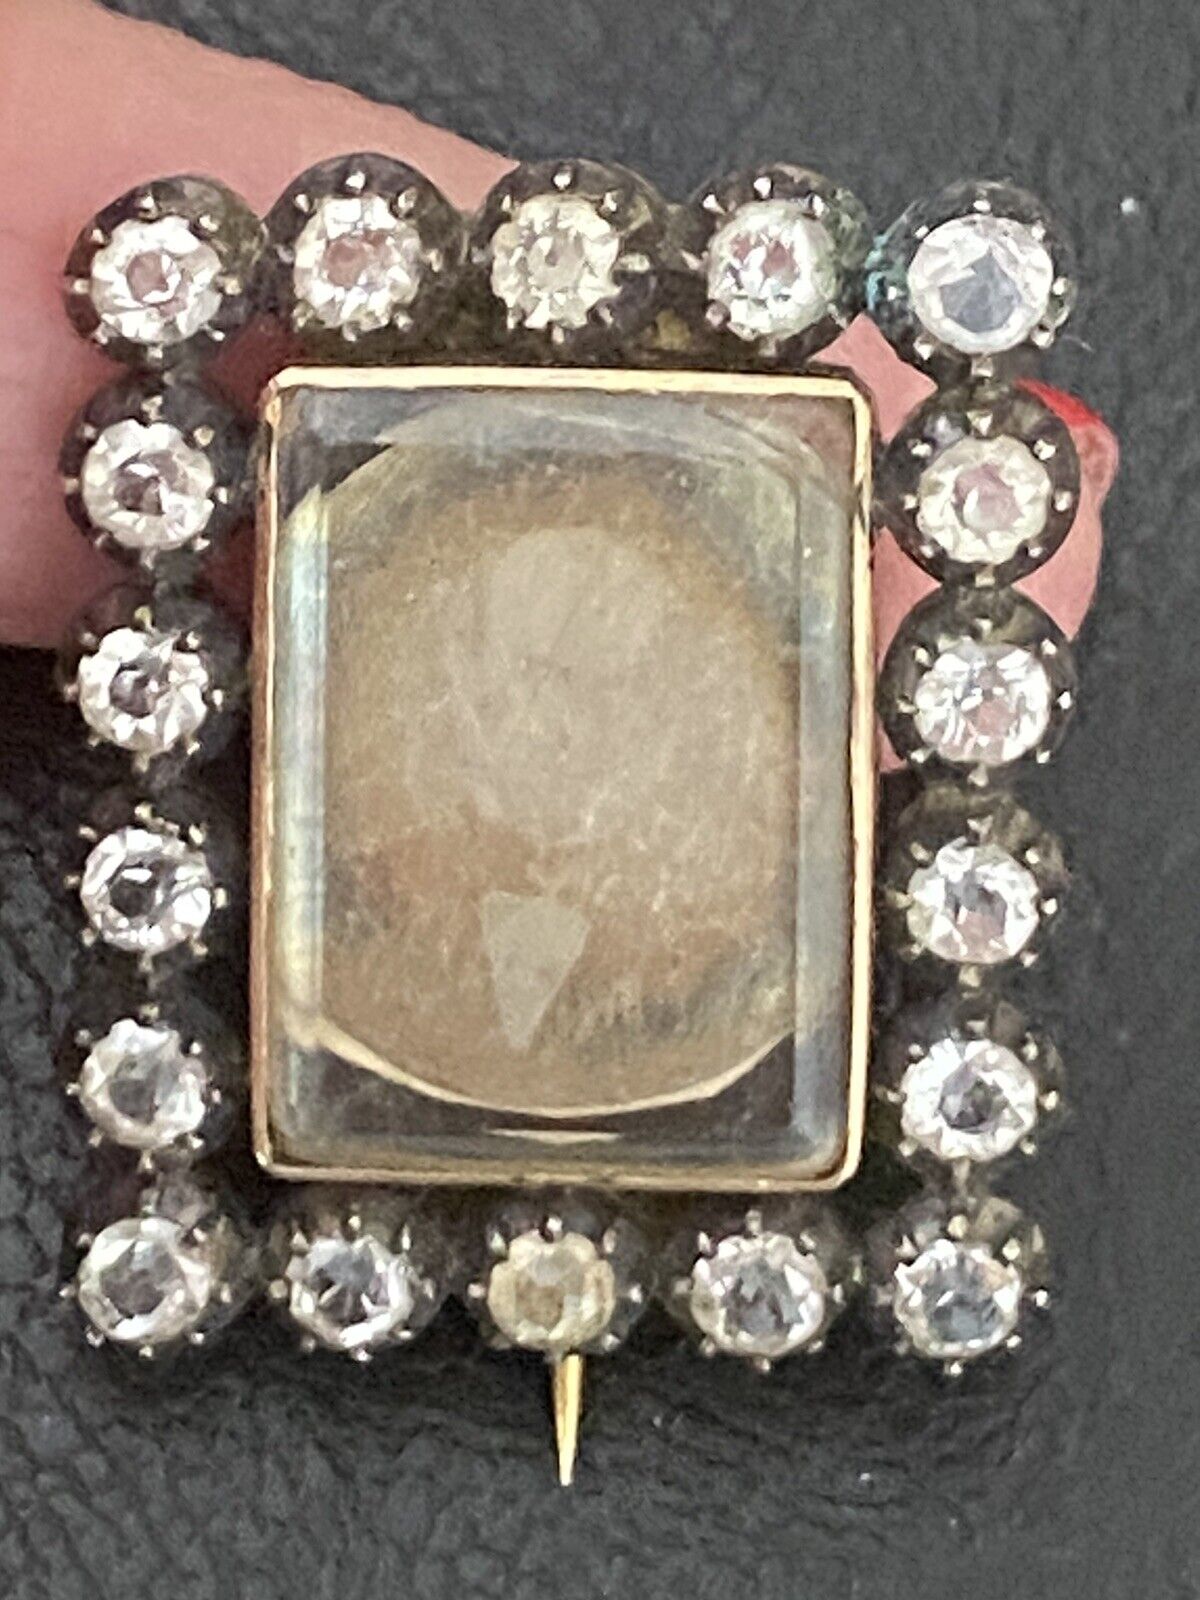 SUPERB DAGUERREOTYPE MOUNTED OVER SILVER,GOLD & SHINY RHINESTONES BROOCH c 1850